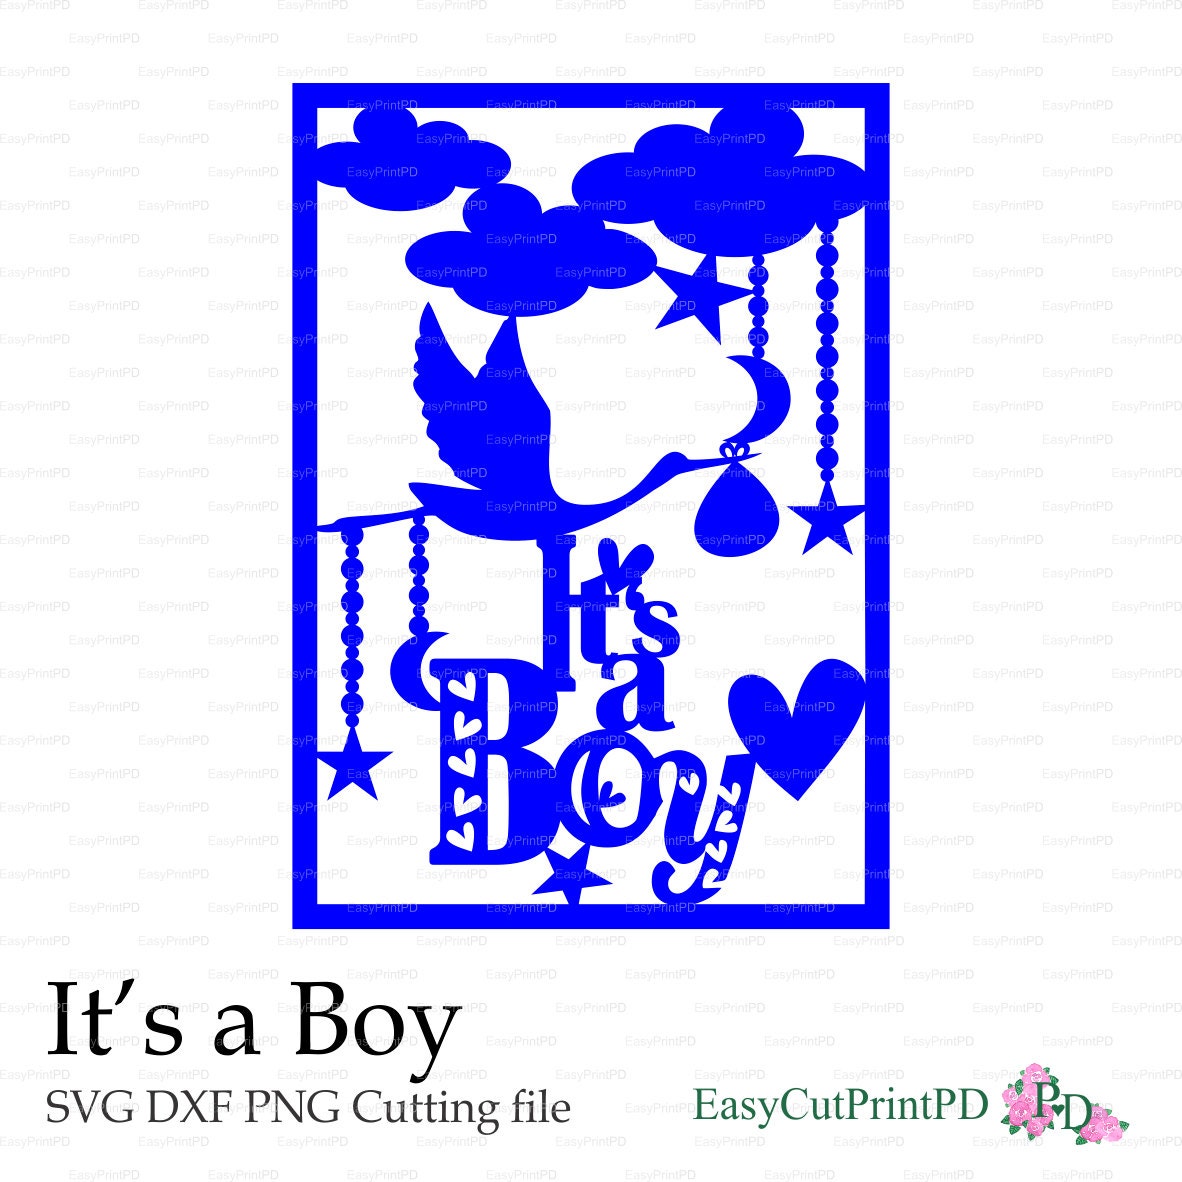 New Baby It's a Boy card paper cut svg dxf eps png